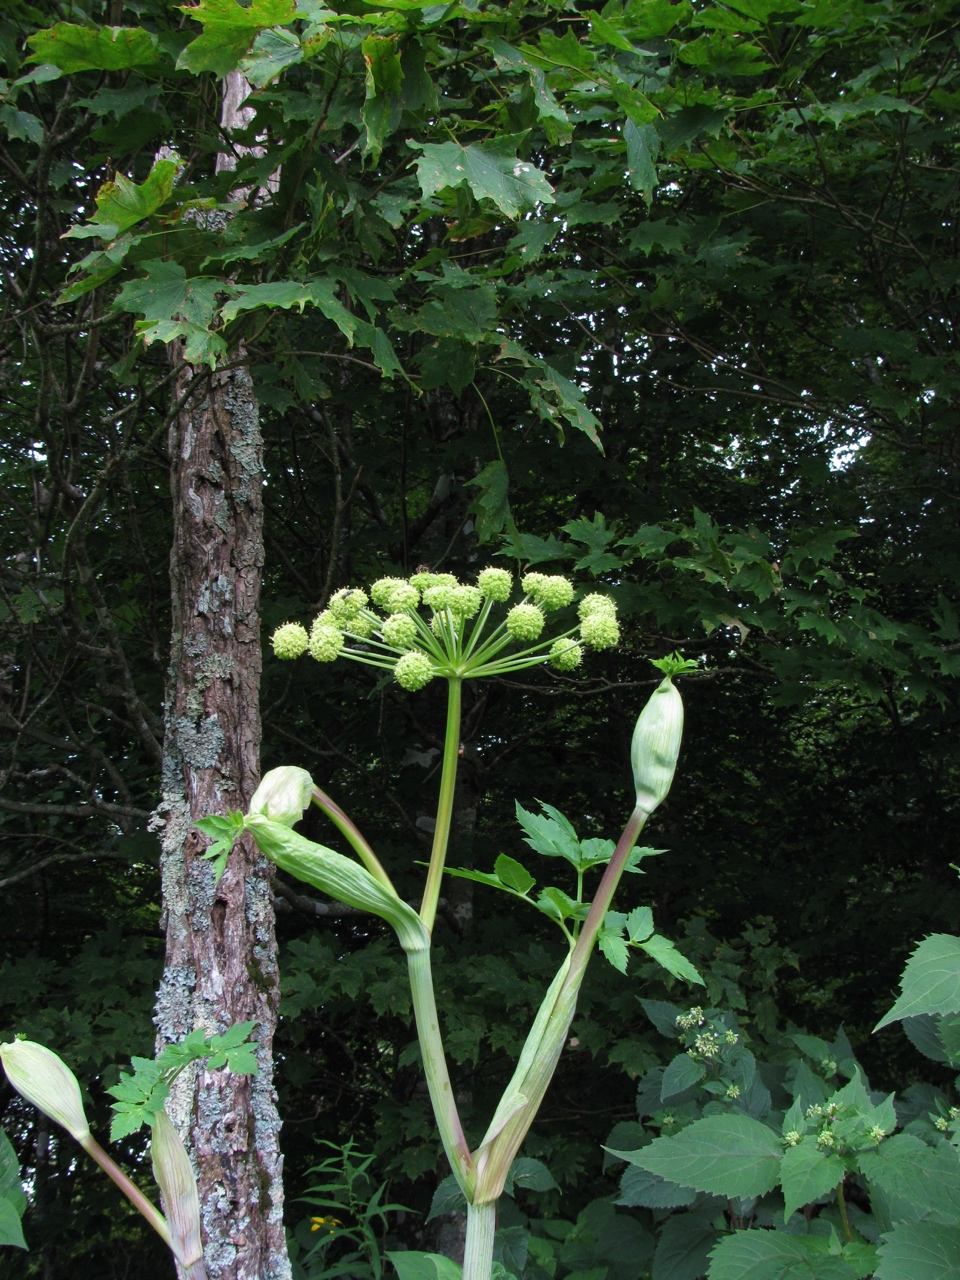 The Scientific Name is Angelica triquinata. You will likely hear them called Filmy Angelica, Mountain Angelica, Appalachian Angelica. This picture shows the  of Angelica triquinata